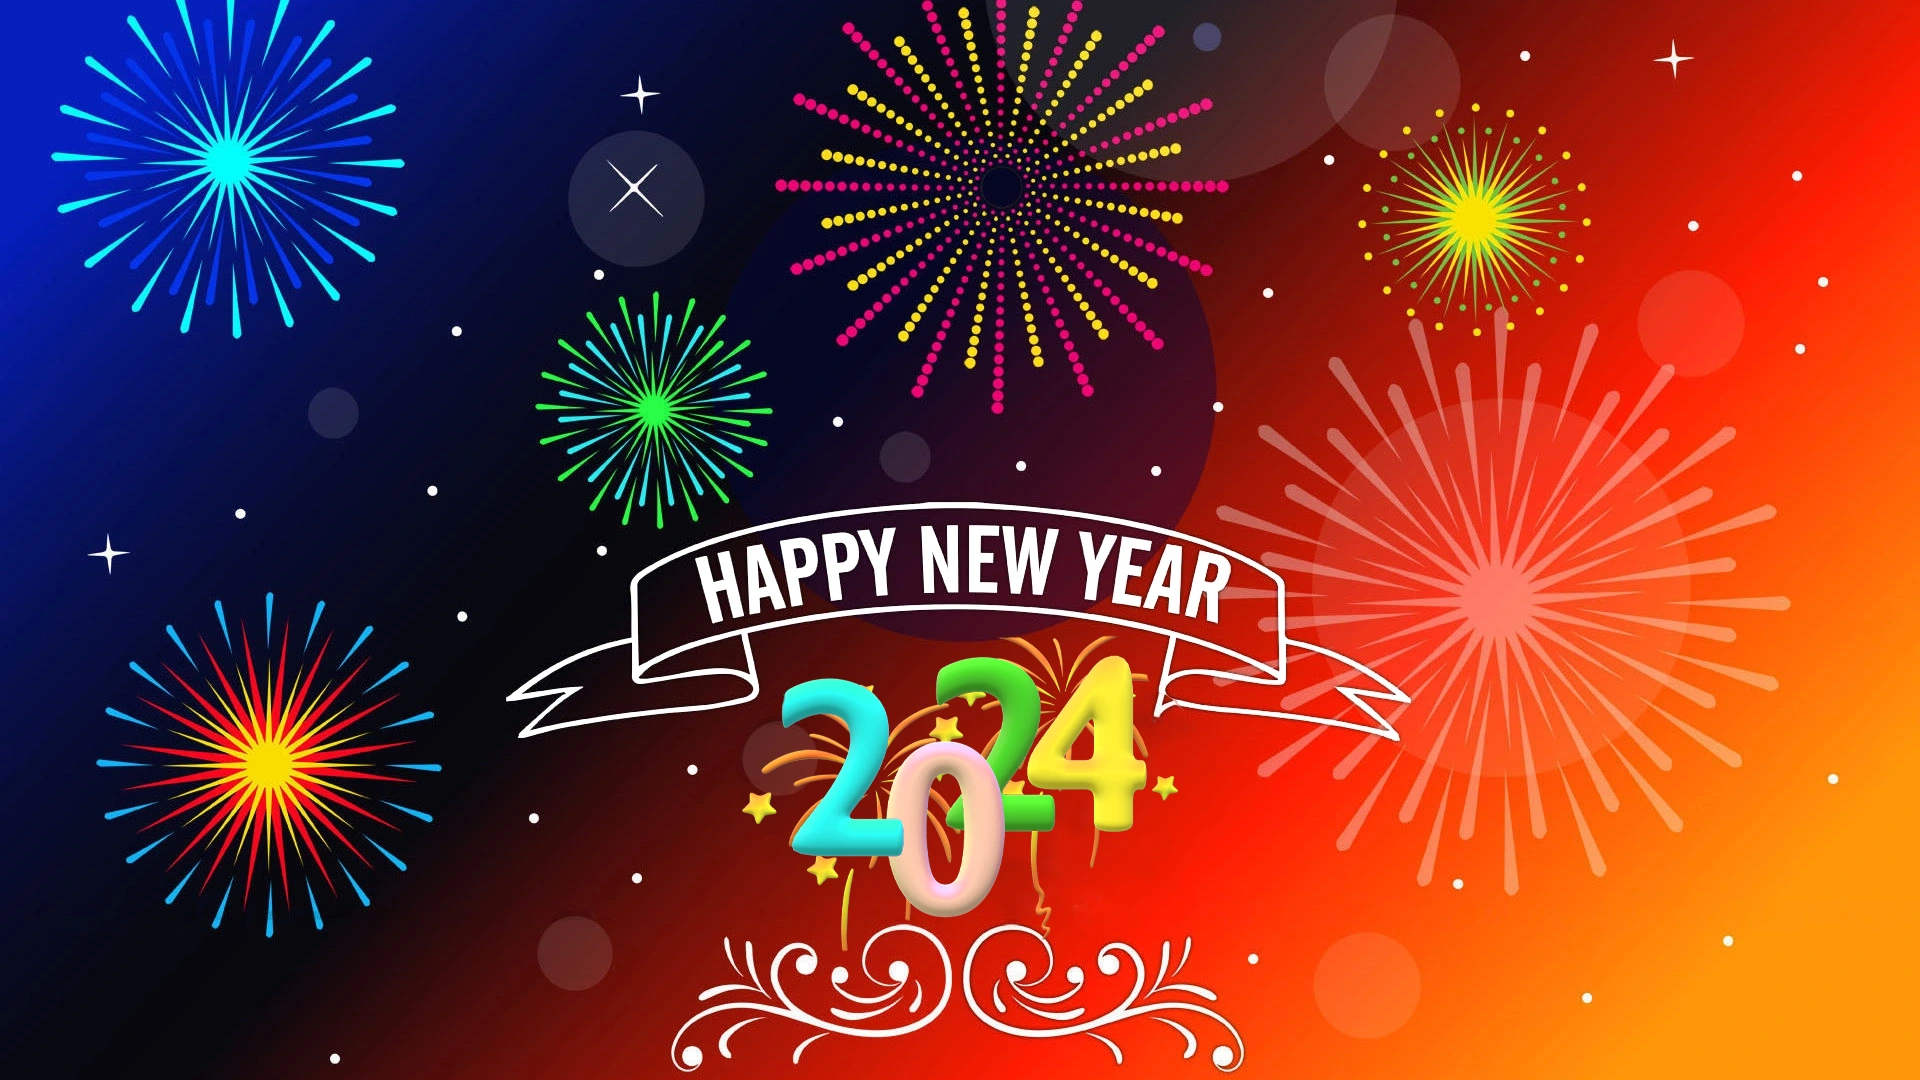 Happy New Year 2024 firework Wallpaper HD for mobile phone 1920x1200 1 1920x1080 1